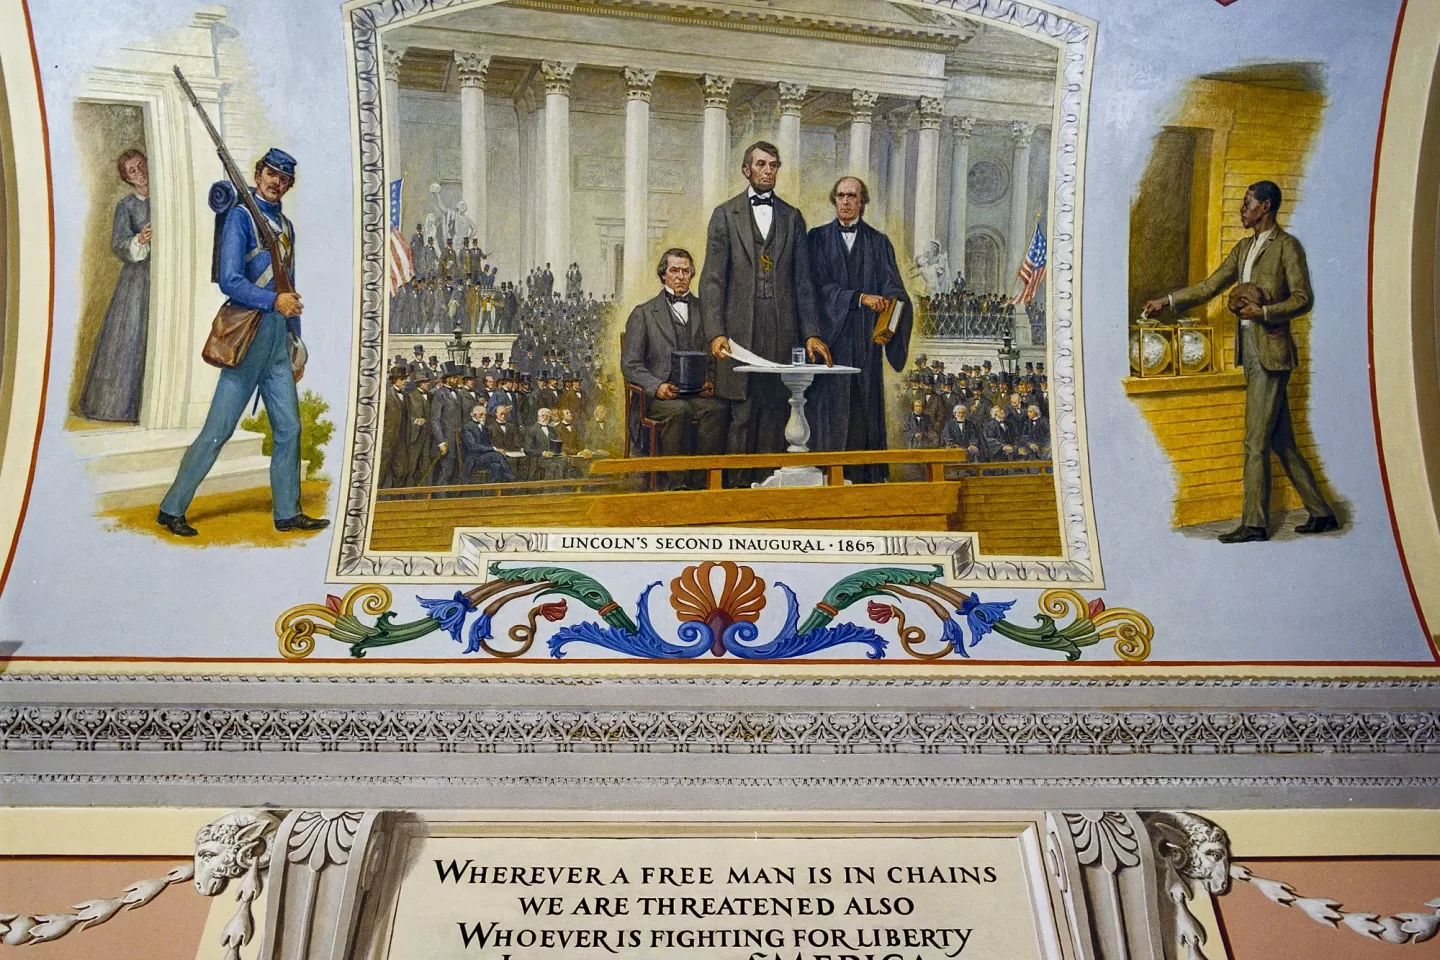 "Lincoln's Second Inaugural, 1865" by Allyn Cox